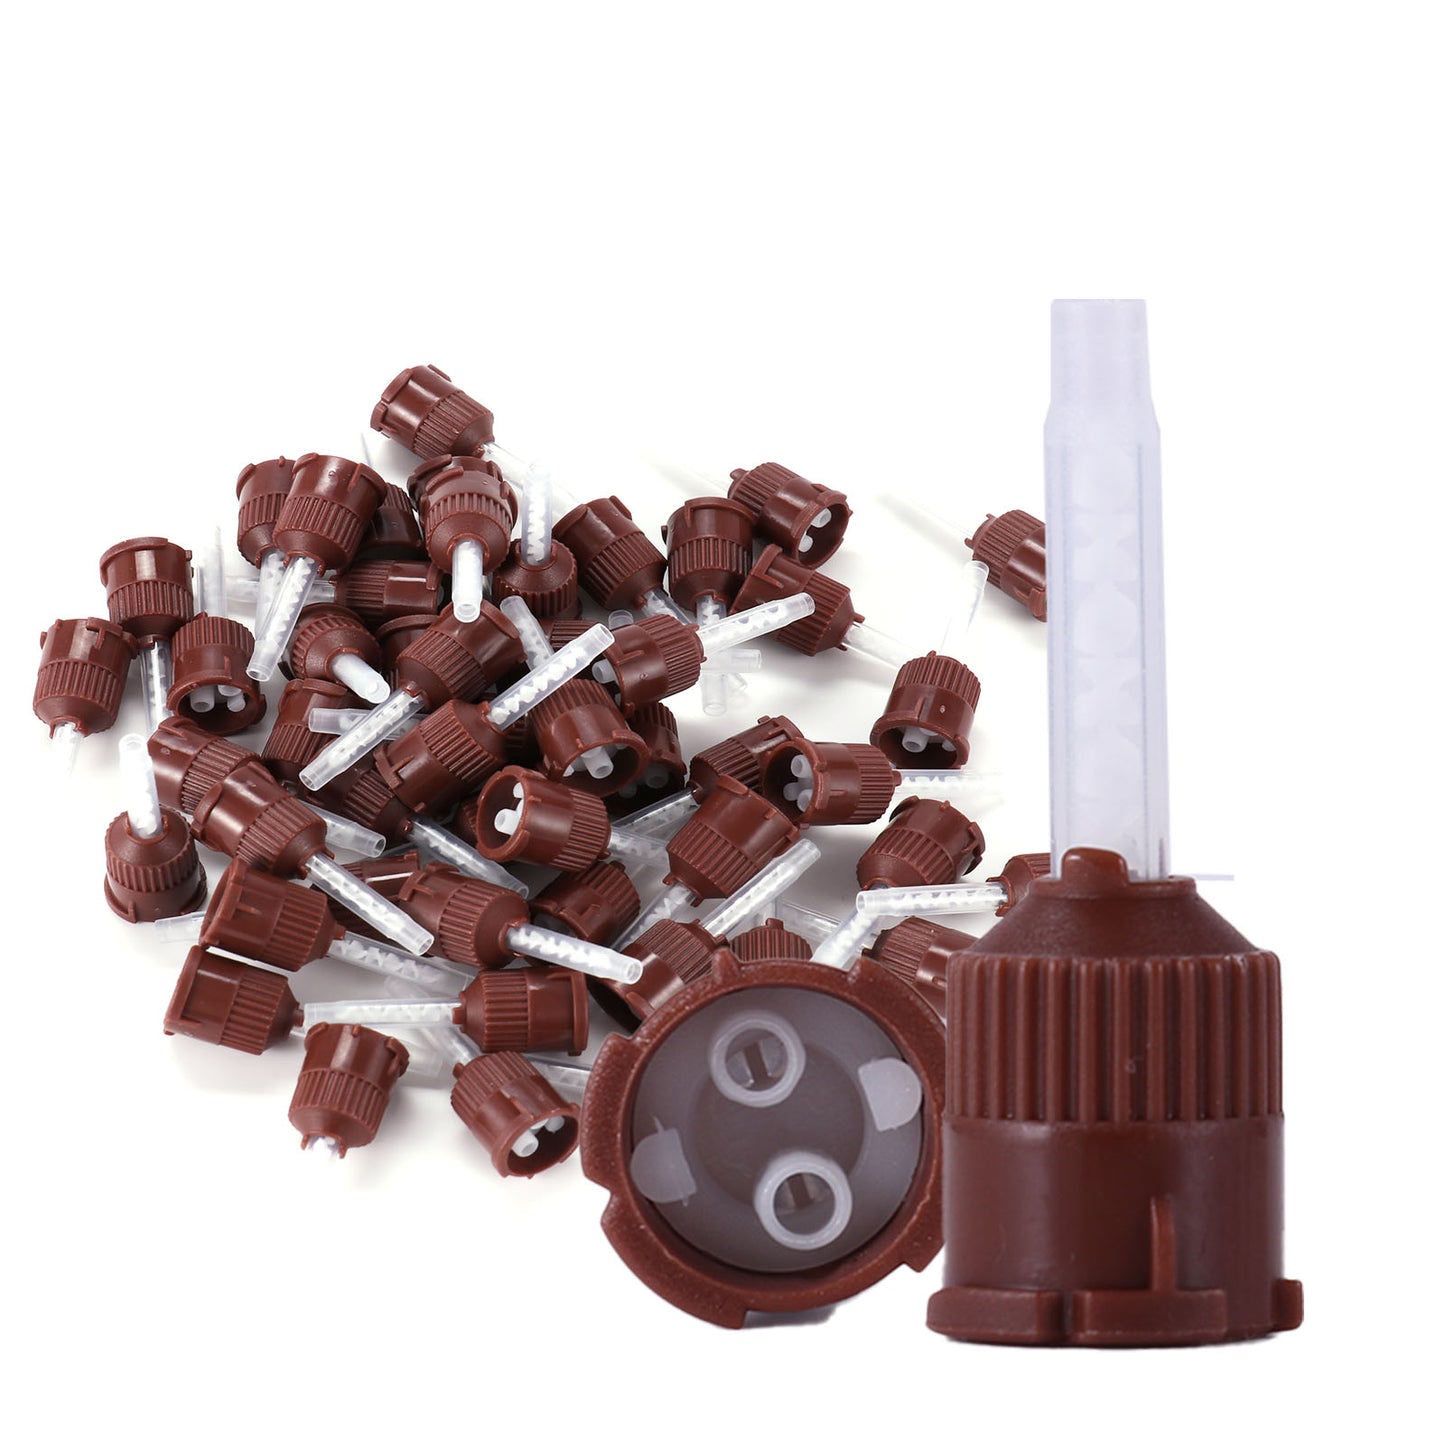 LA MIERE 50 Pcs High Performance Impression Mixing Tips,  Compatible with Impression Material Dispenser Systems Heavy Body